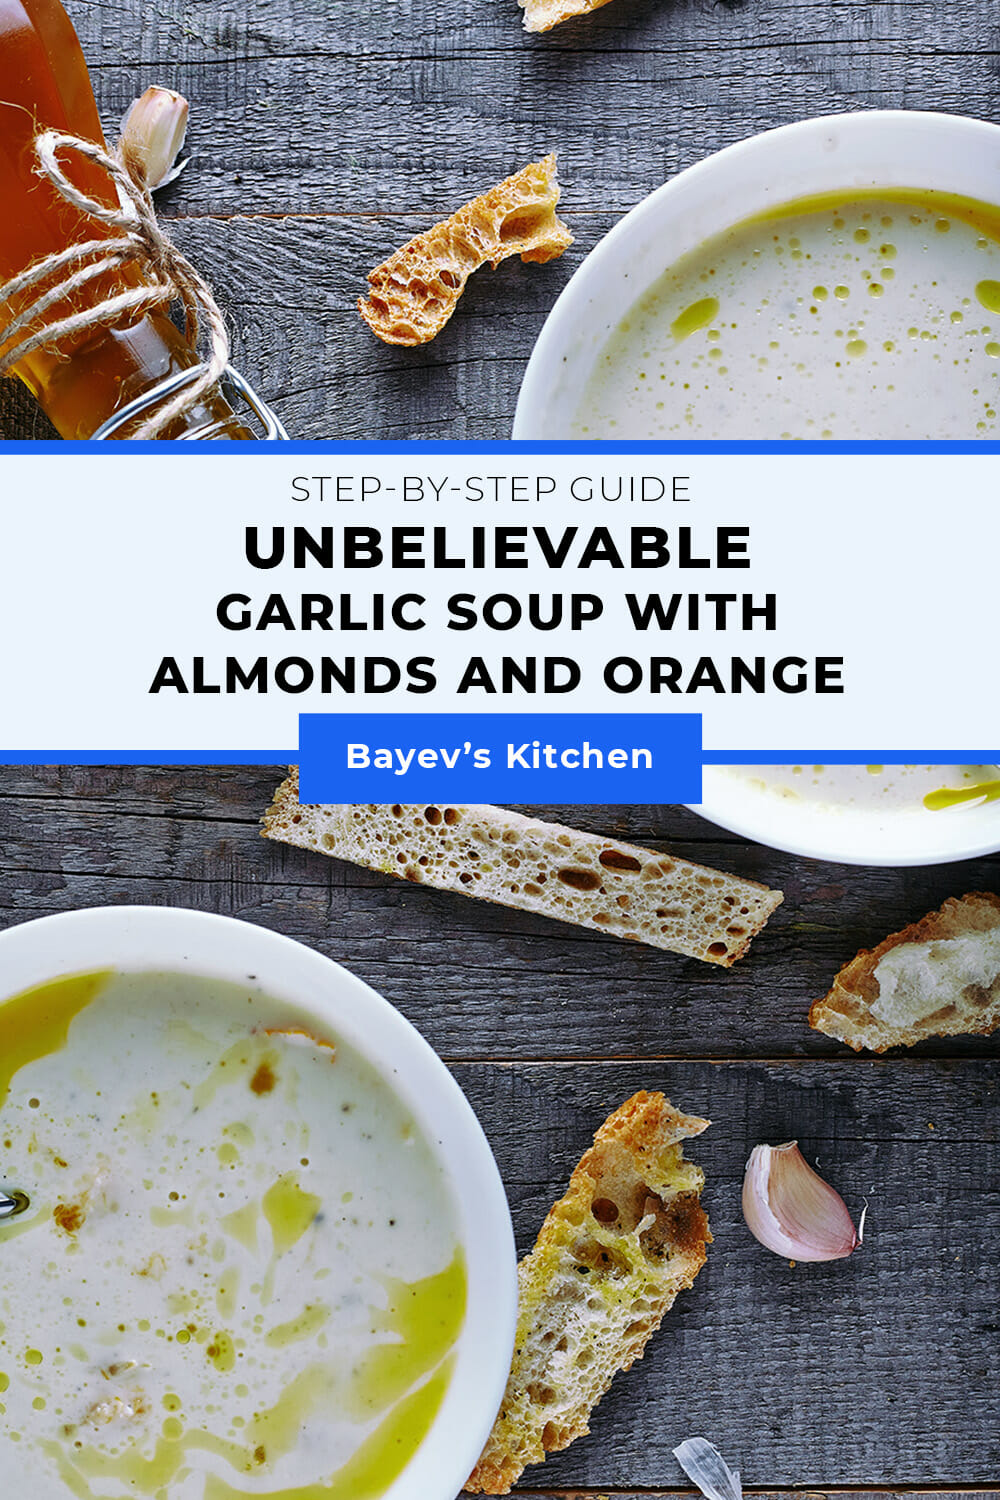 This recipe of Garlic Cream of Soup with almonds with oranges is unbelievable. Is one of those that amaze with taste, a combination of ingredients, and simplicity. Therefore this soup is a perfect choice if you want to cook something special for your friends or close ones. #soup #souprecipes #garlicsoup